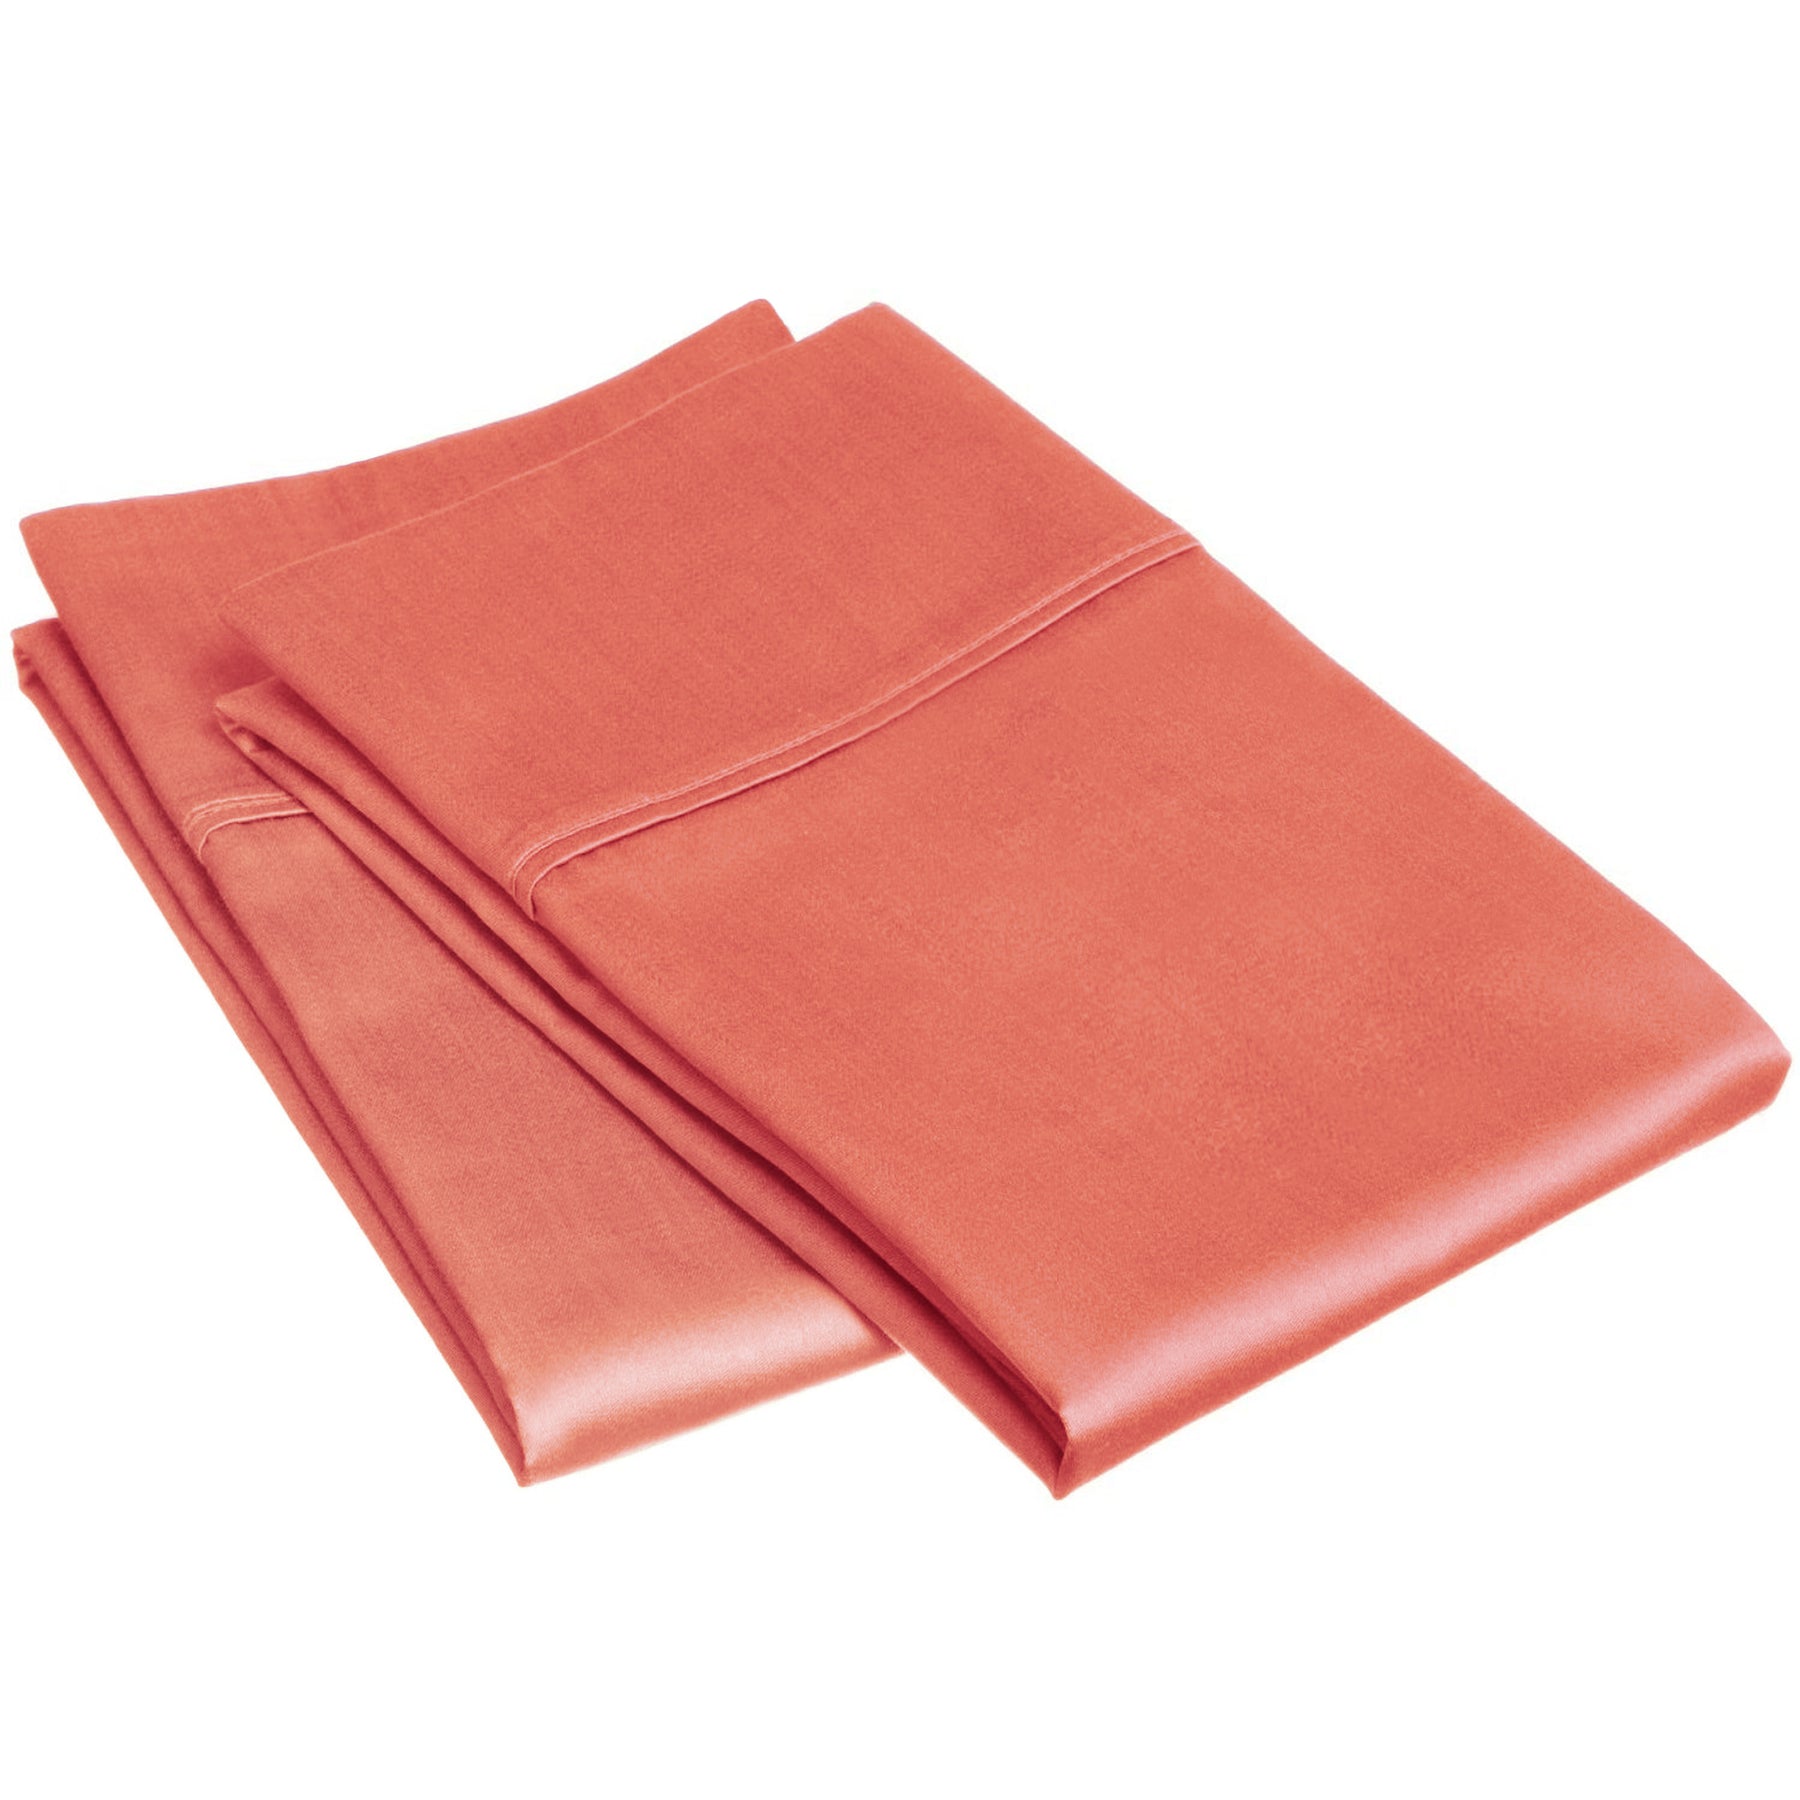 Superior Egyptian Cotton 300 Thread Count Solid Pillowcase Set - Coral